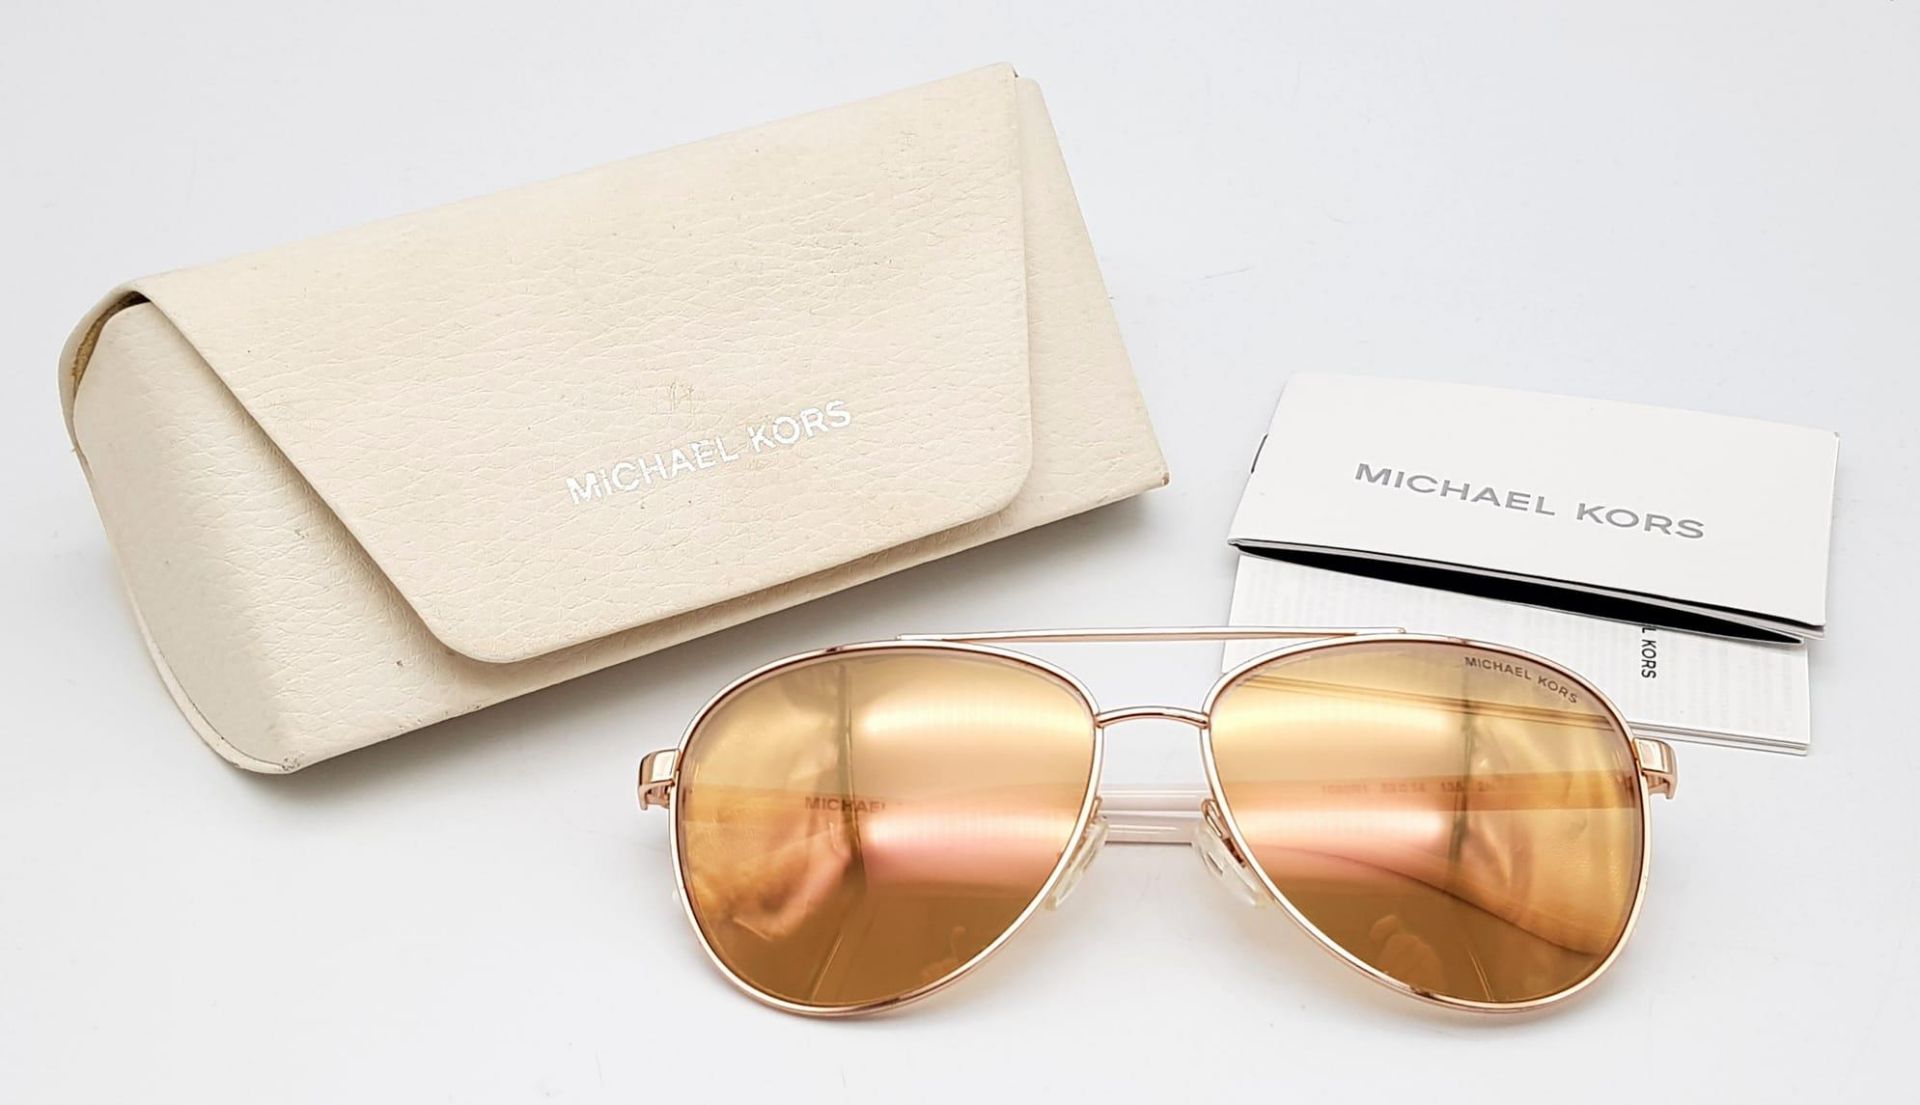 A Pair of Michael Kors Sunglasses with Case. - Image 7 of 7